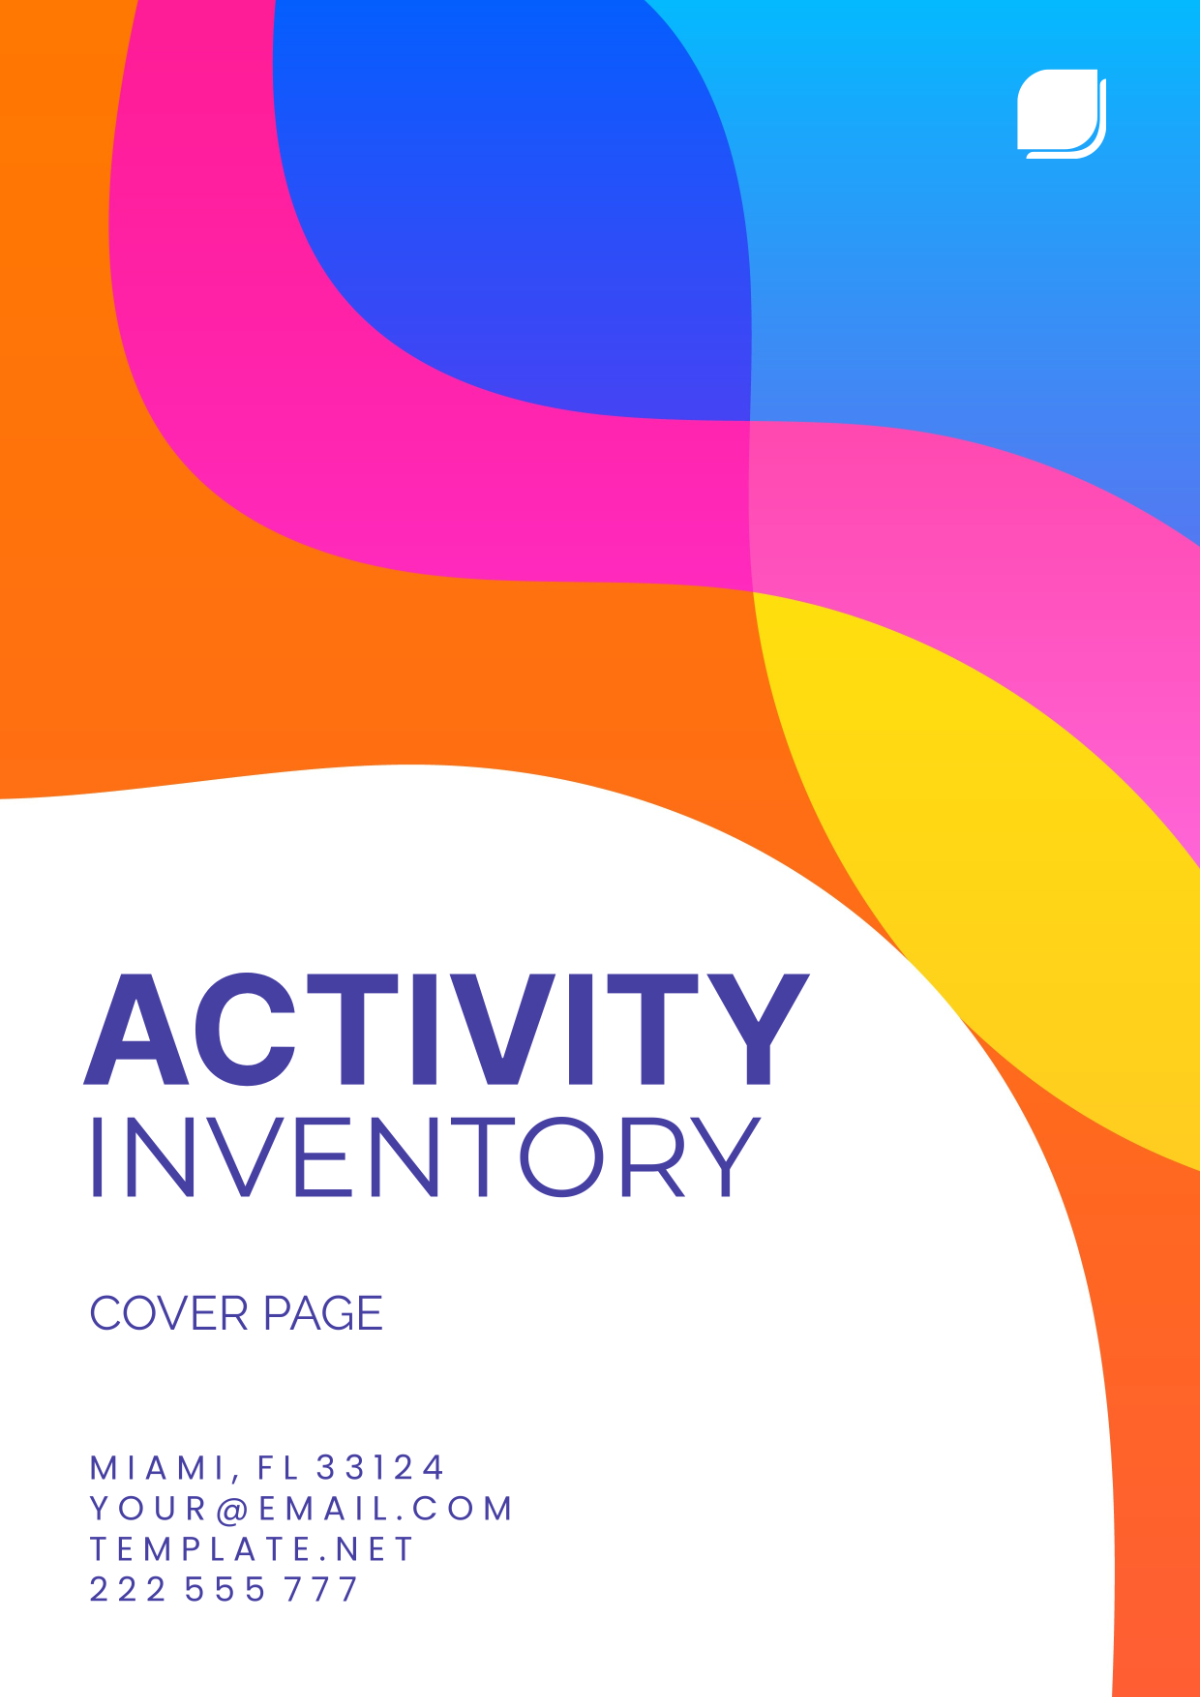 Free Activity Inventory Cover Page Template